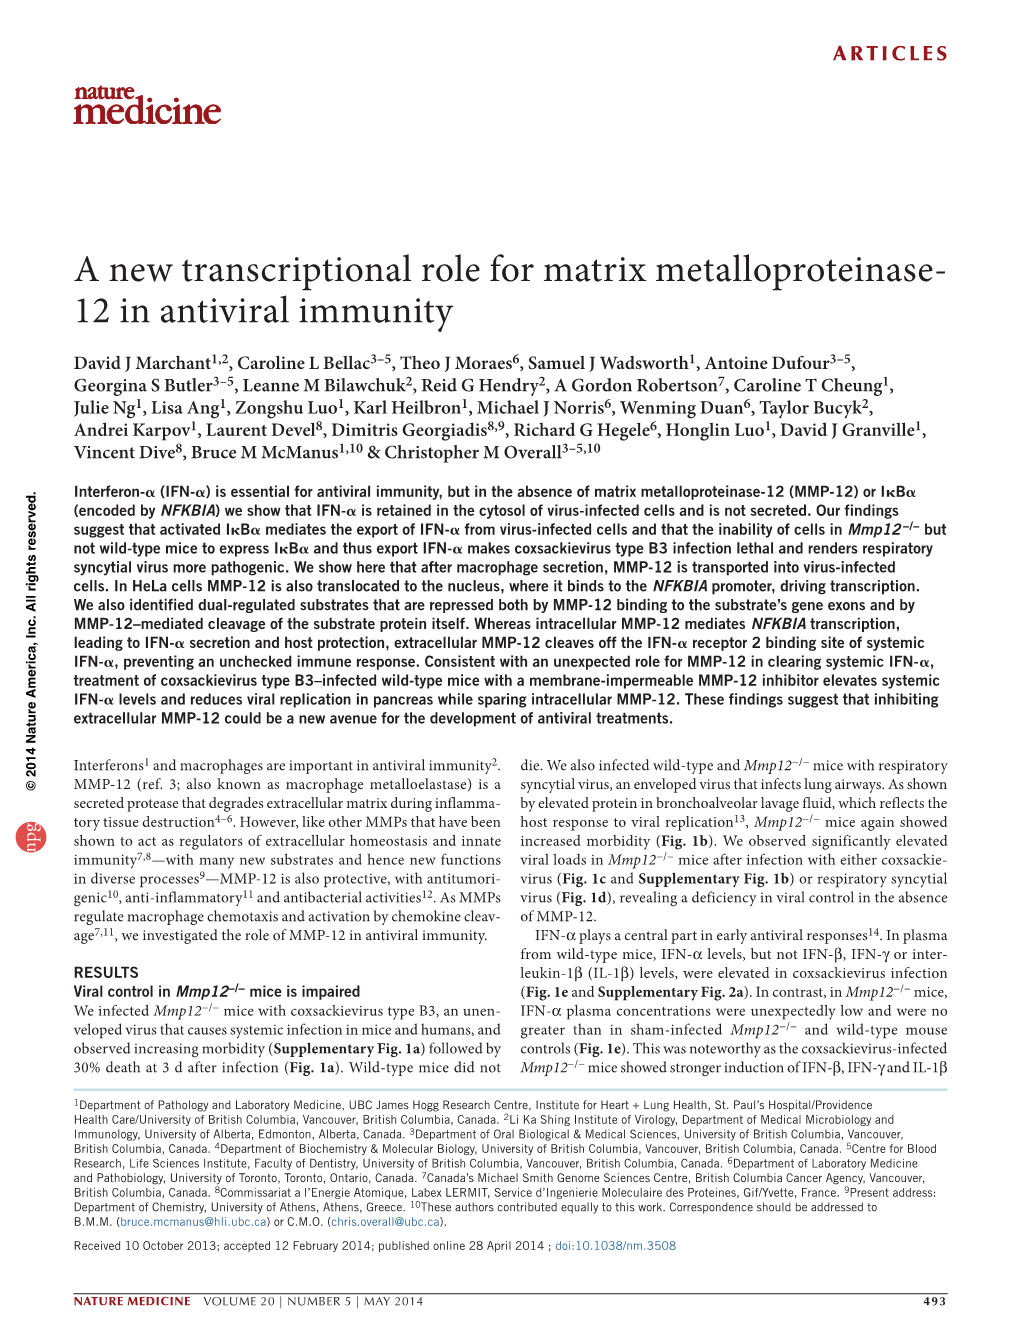 A New Transcriptional Role for Matrix Metalloproteinase-12 in Antiviral Immunity